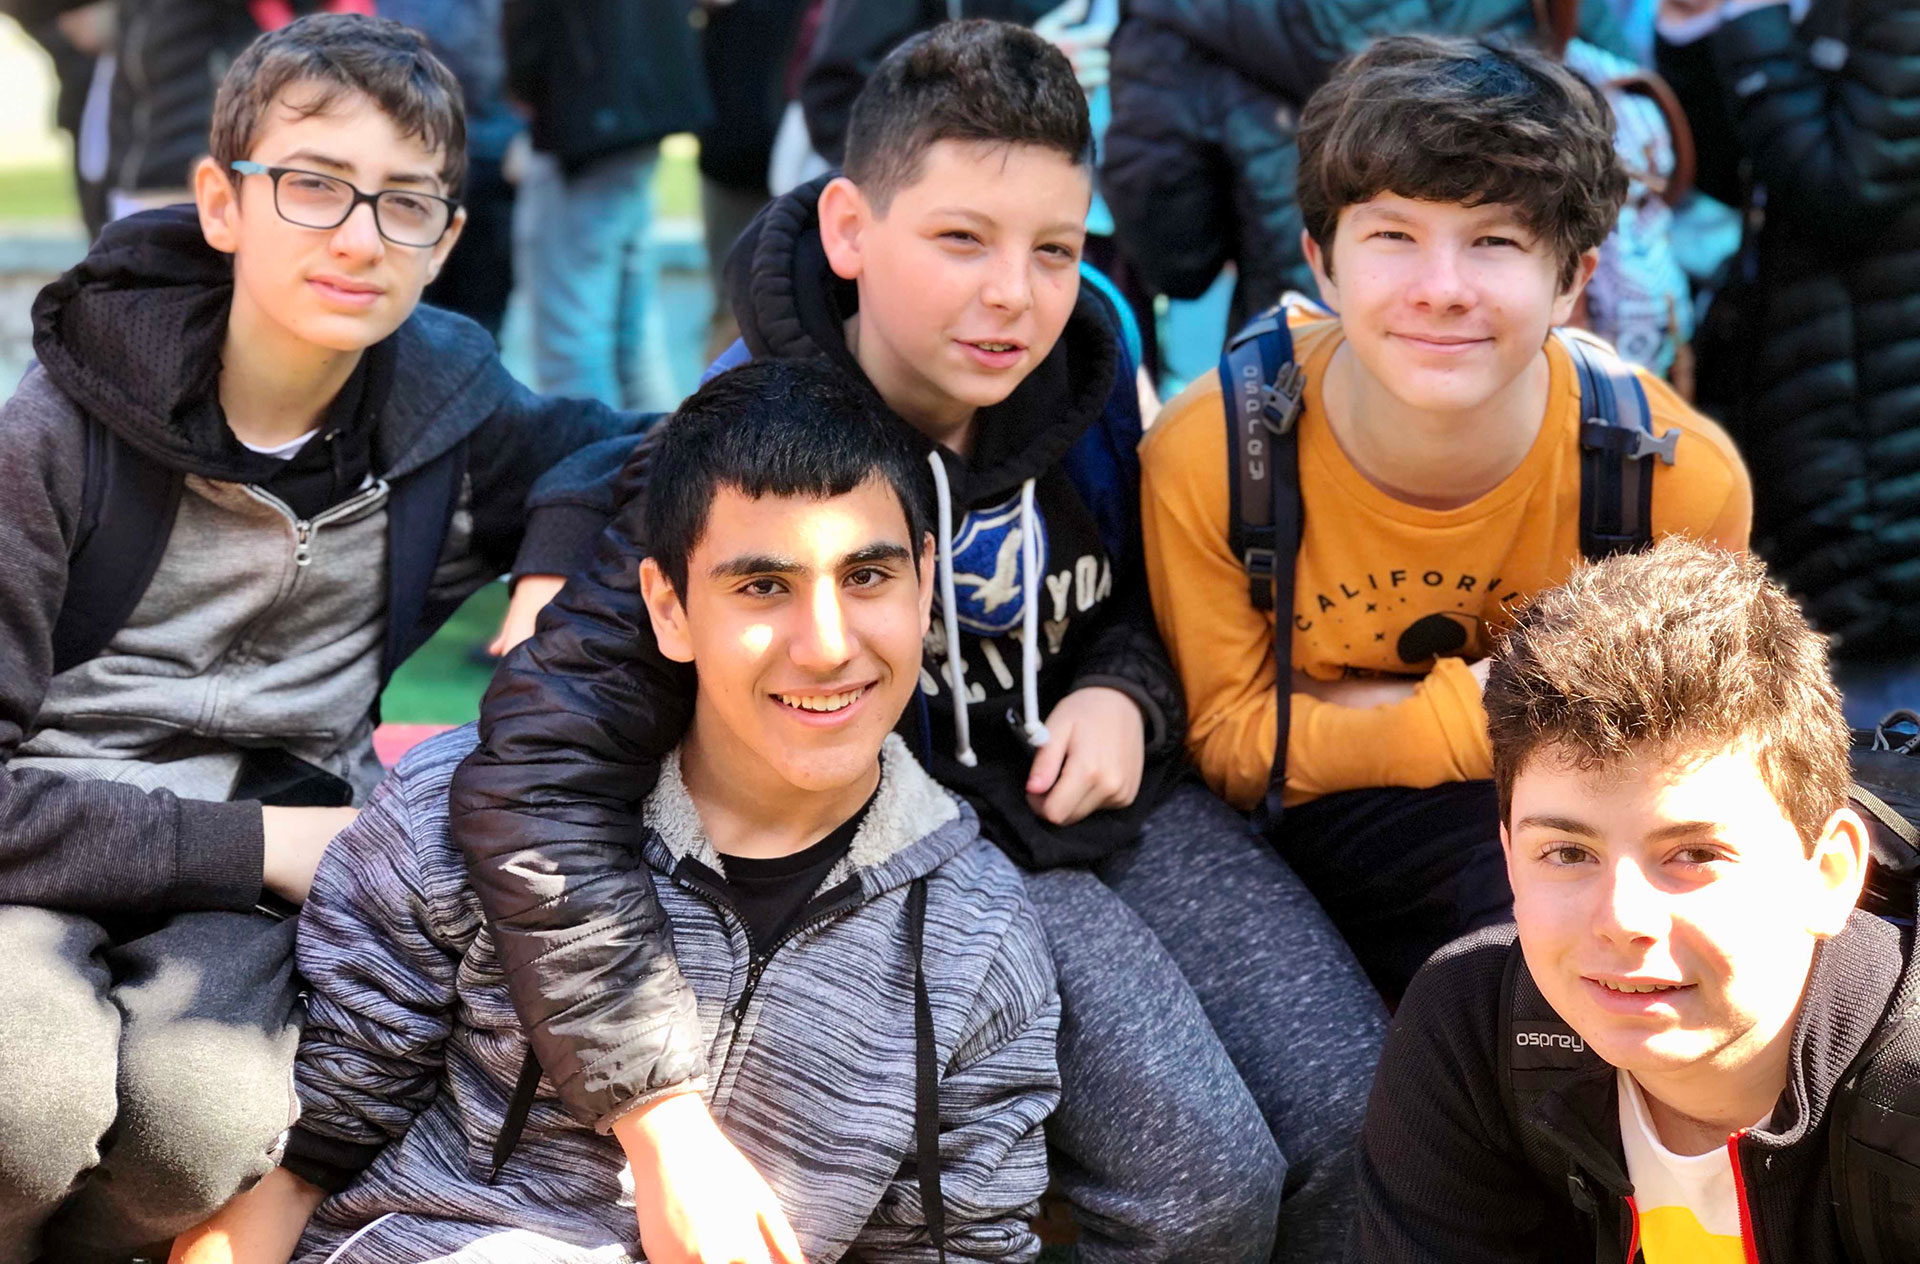 A group of Israeli and American boys sit together outdoors.